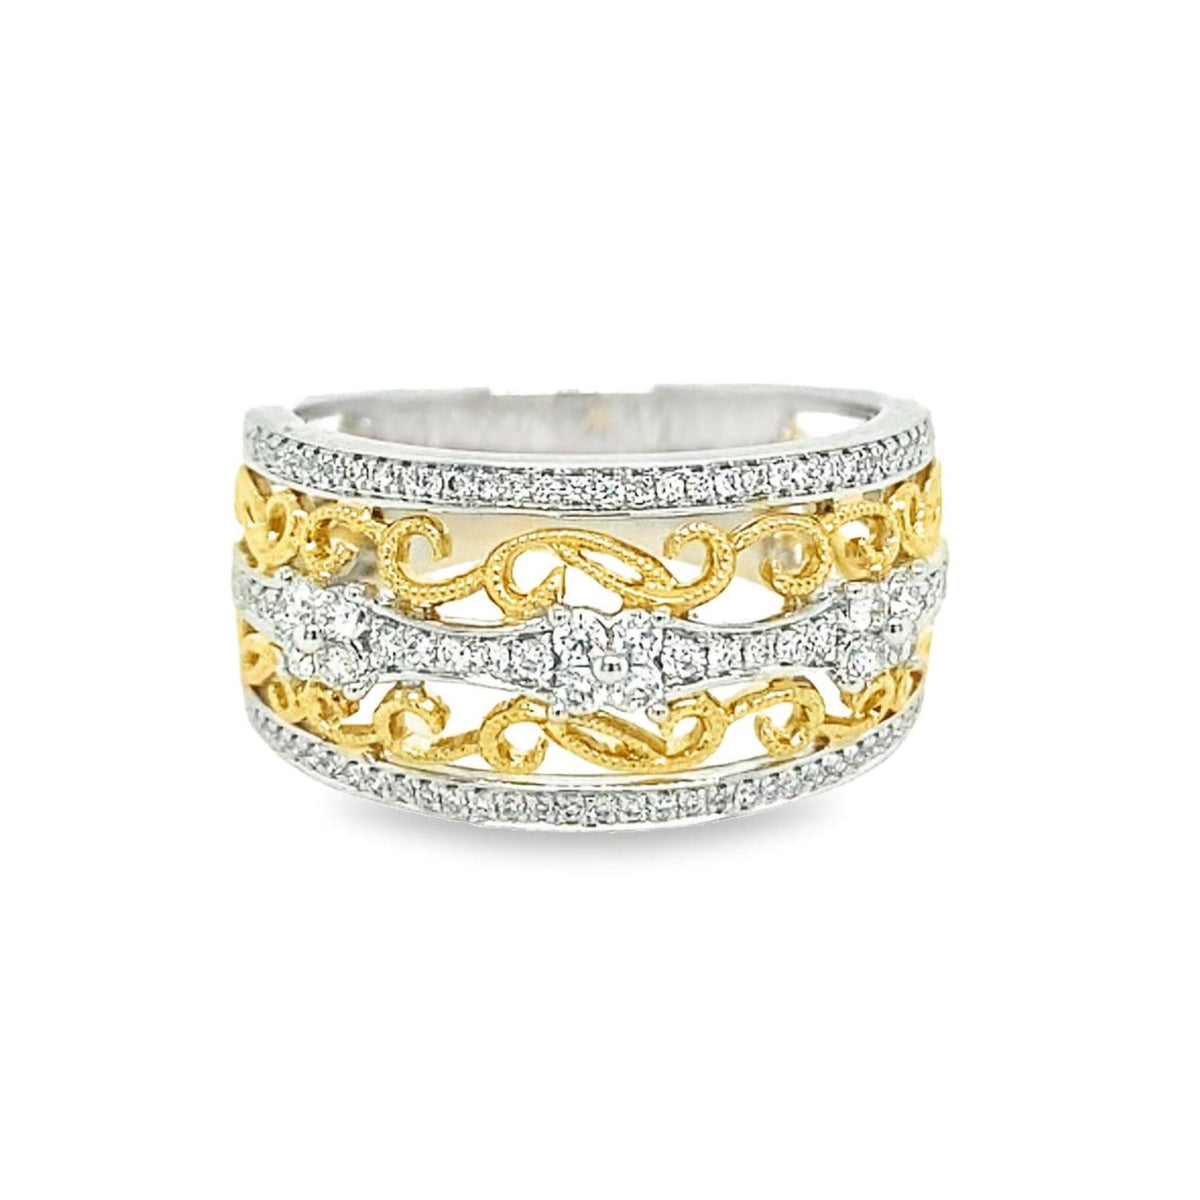 14Kt Yellow & White Gold Vintage Inspired Fashion Ring With 0.33cttw Natural Diamonds